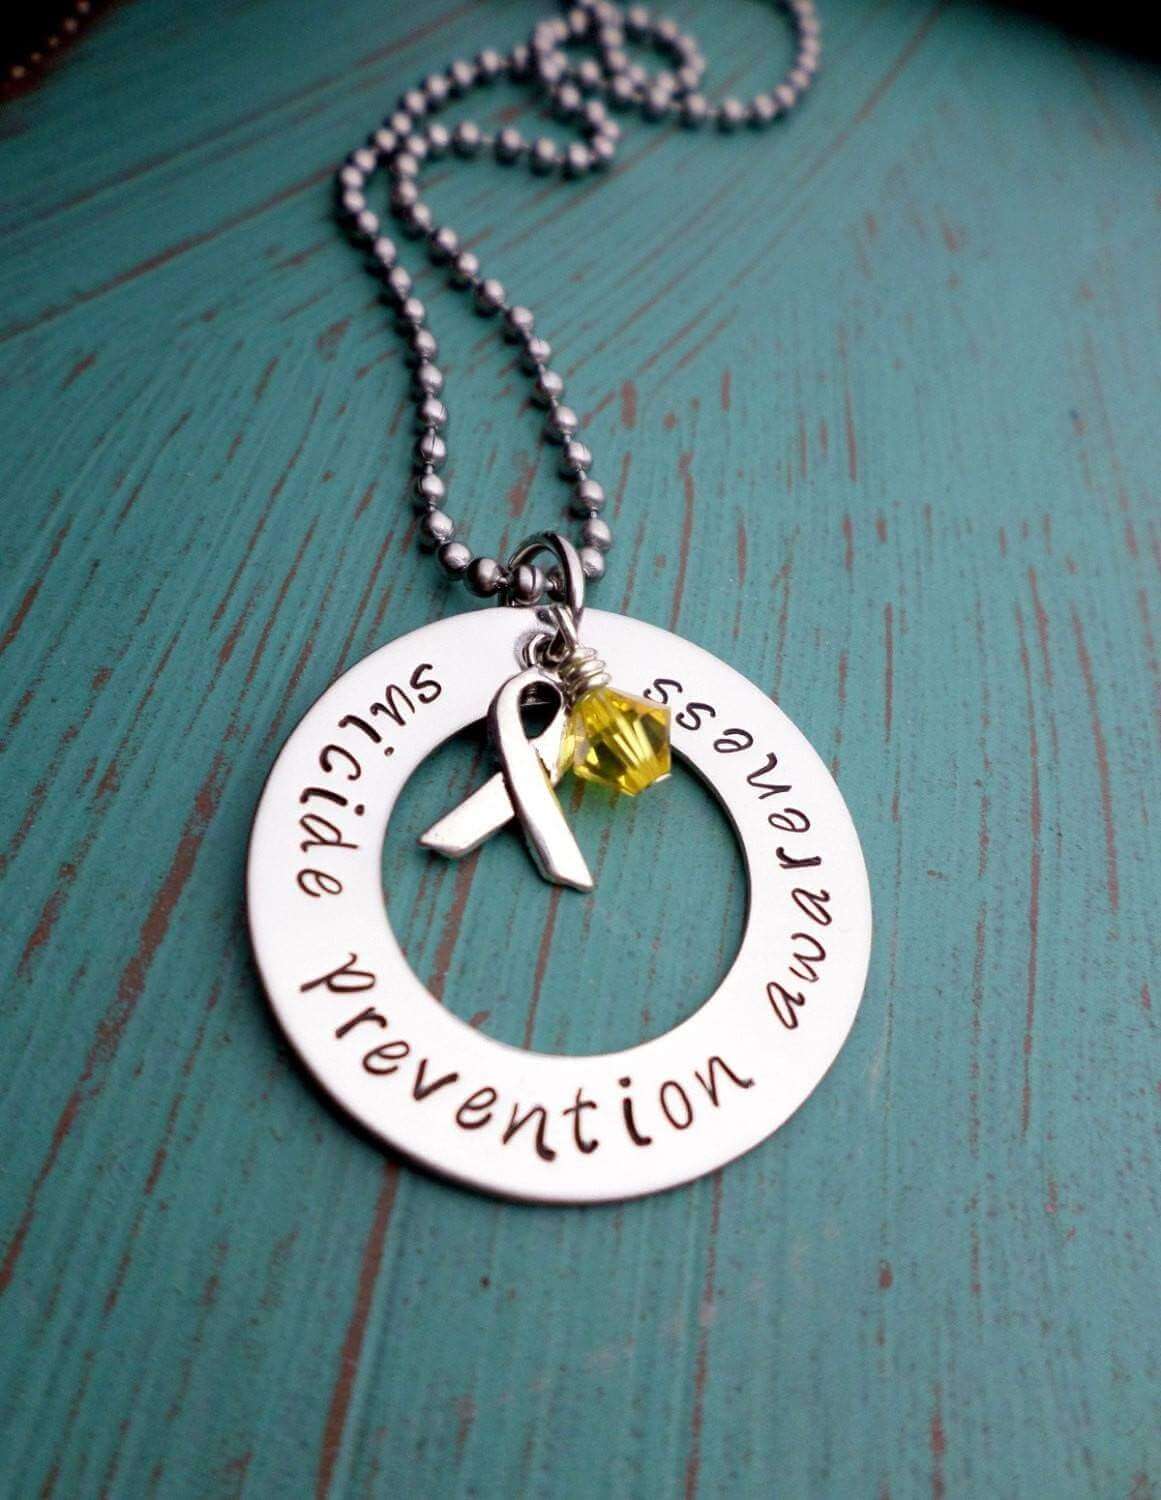 Suicide Prevention Awareness, Suicide Support Necklace, Yellow Awareness Ribbon, Awareness Necklace, Necklaces, HandmadeLoveStories, HandmadeLoveStories , [Handmade_Love_Stories], [Hand_Stamped_Jewelry], [Etsy_Stamped_Jewelry], [Etsy_Jewelry]